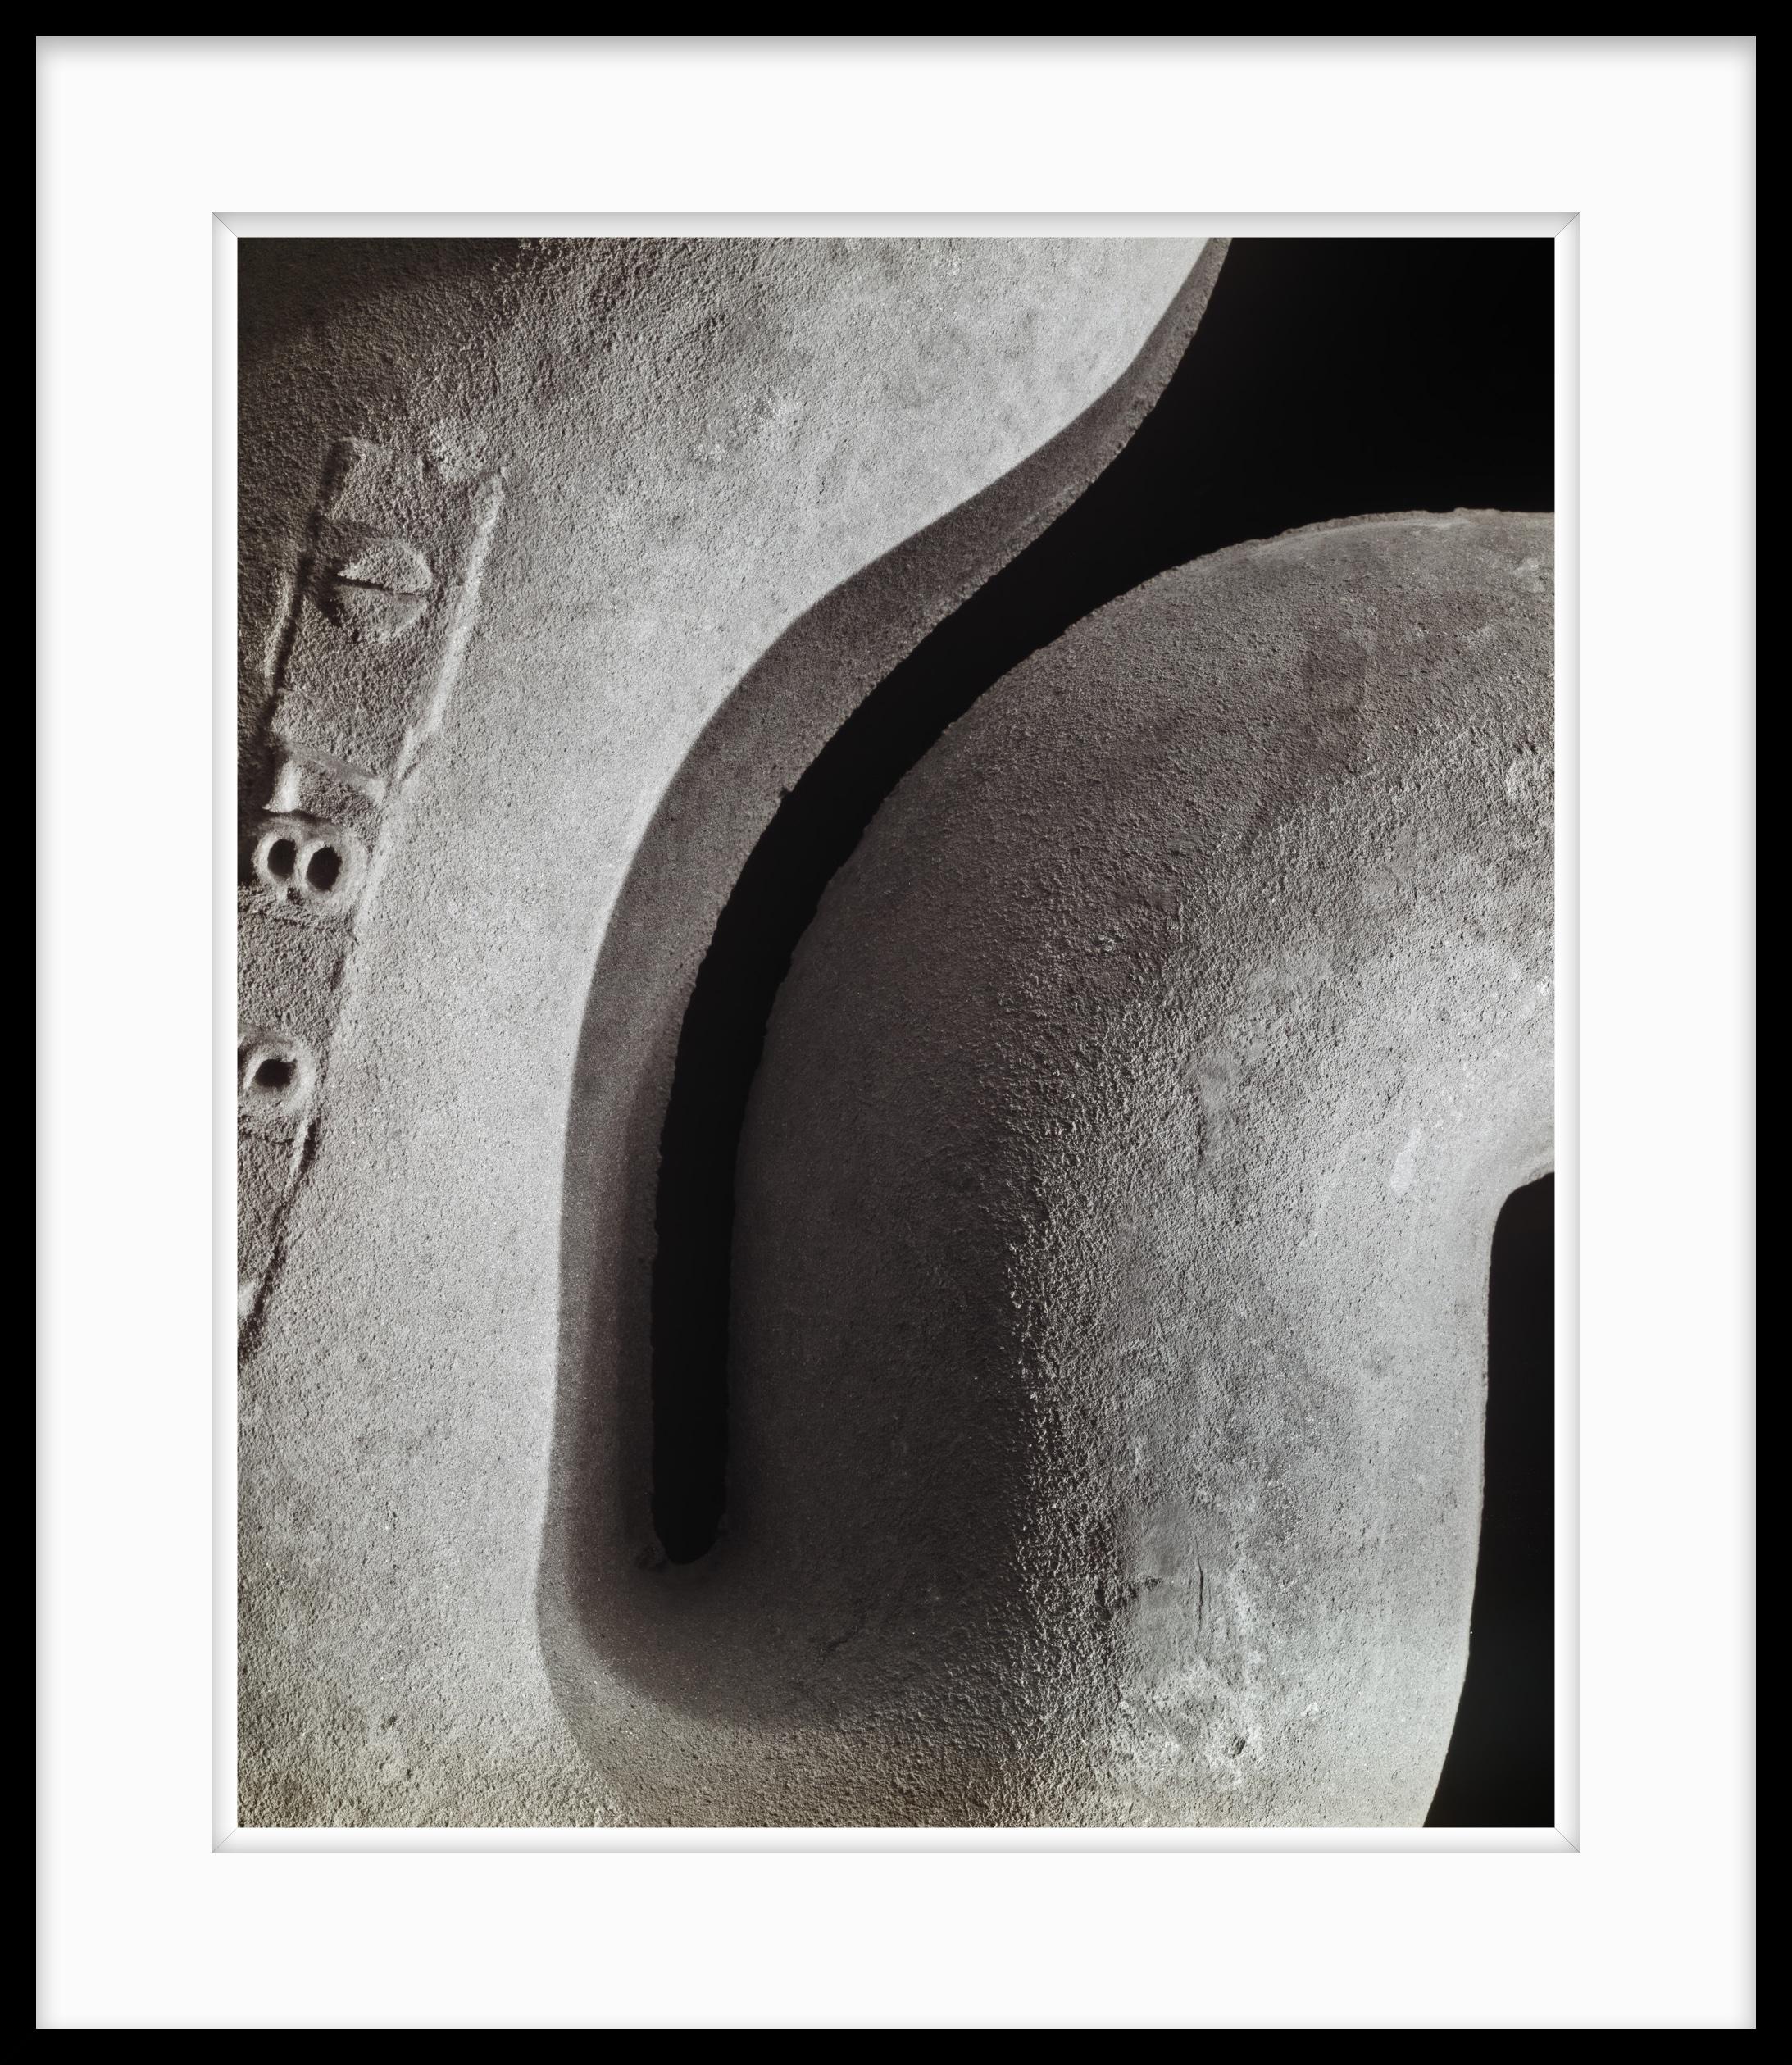  Limited Edition Black and White Still Life Photography, Inner Workings #7 - Gray Black and White Photograph by Howard Lewis